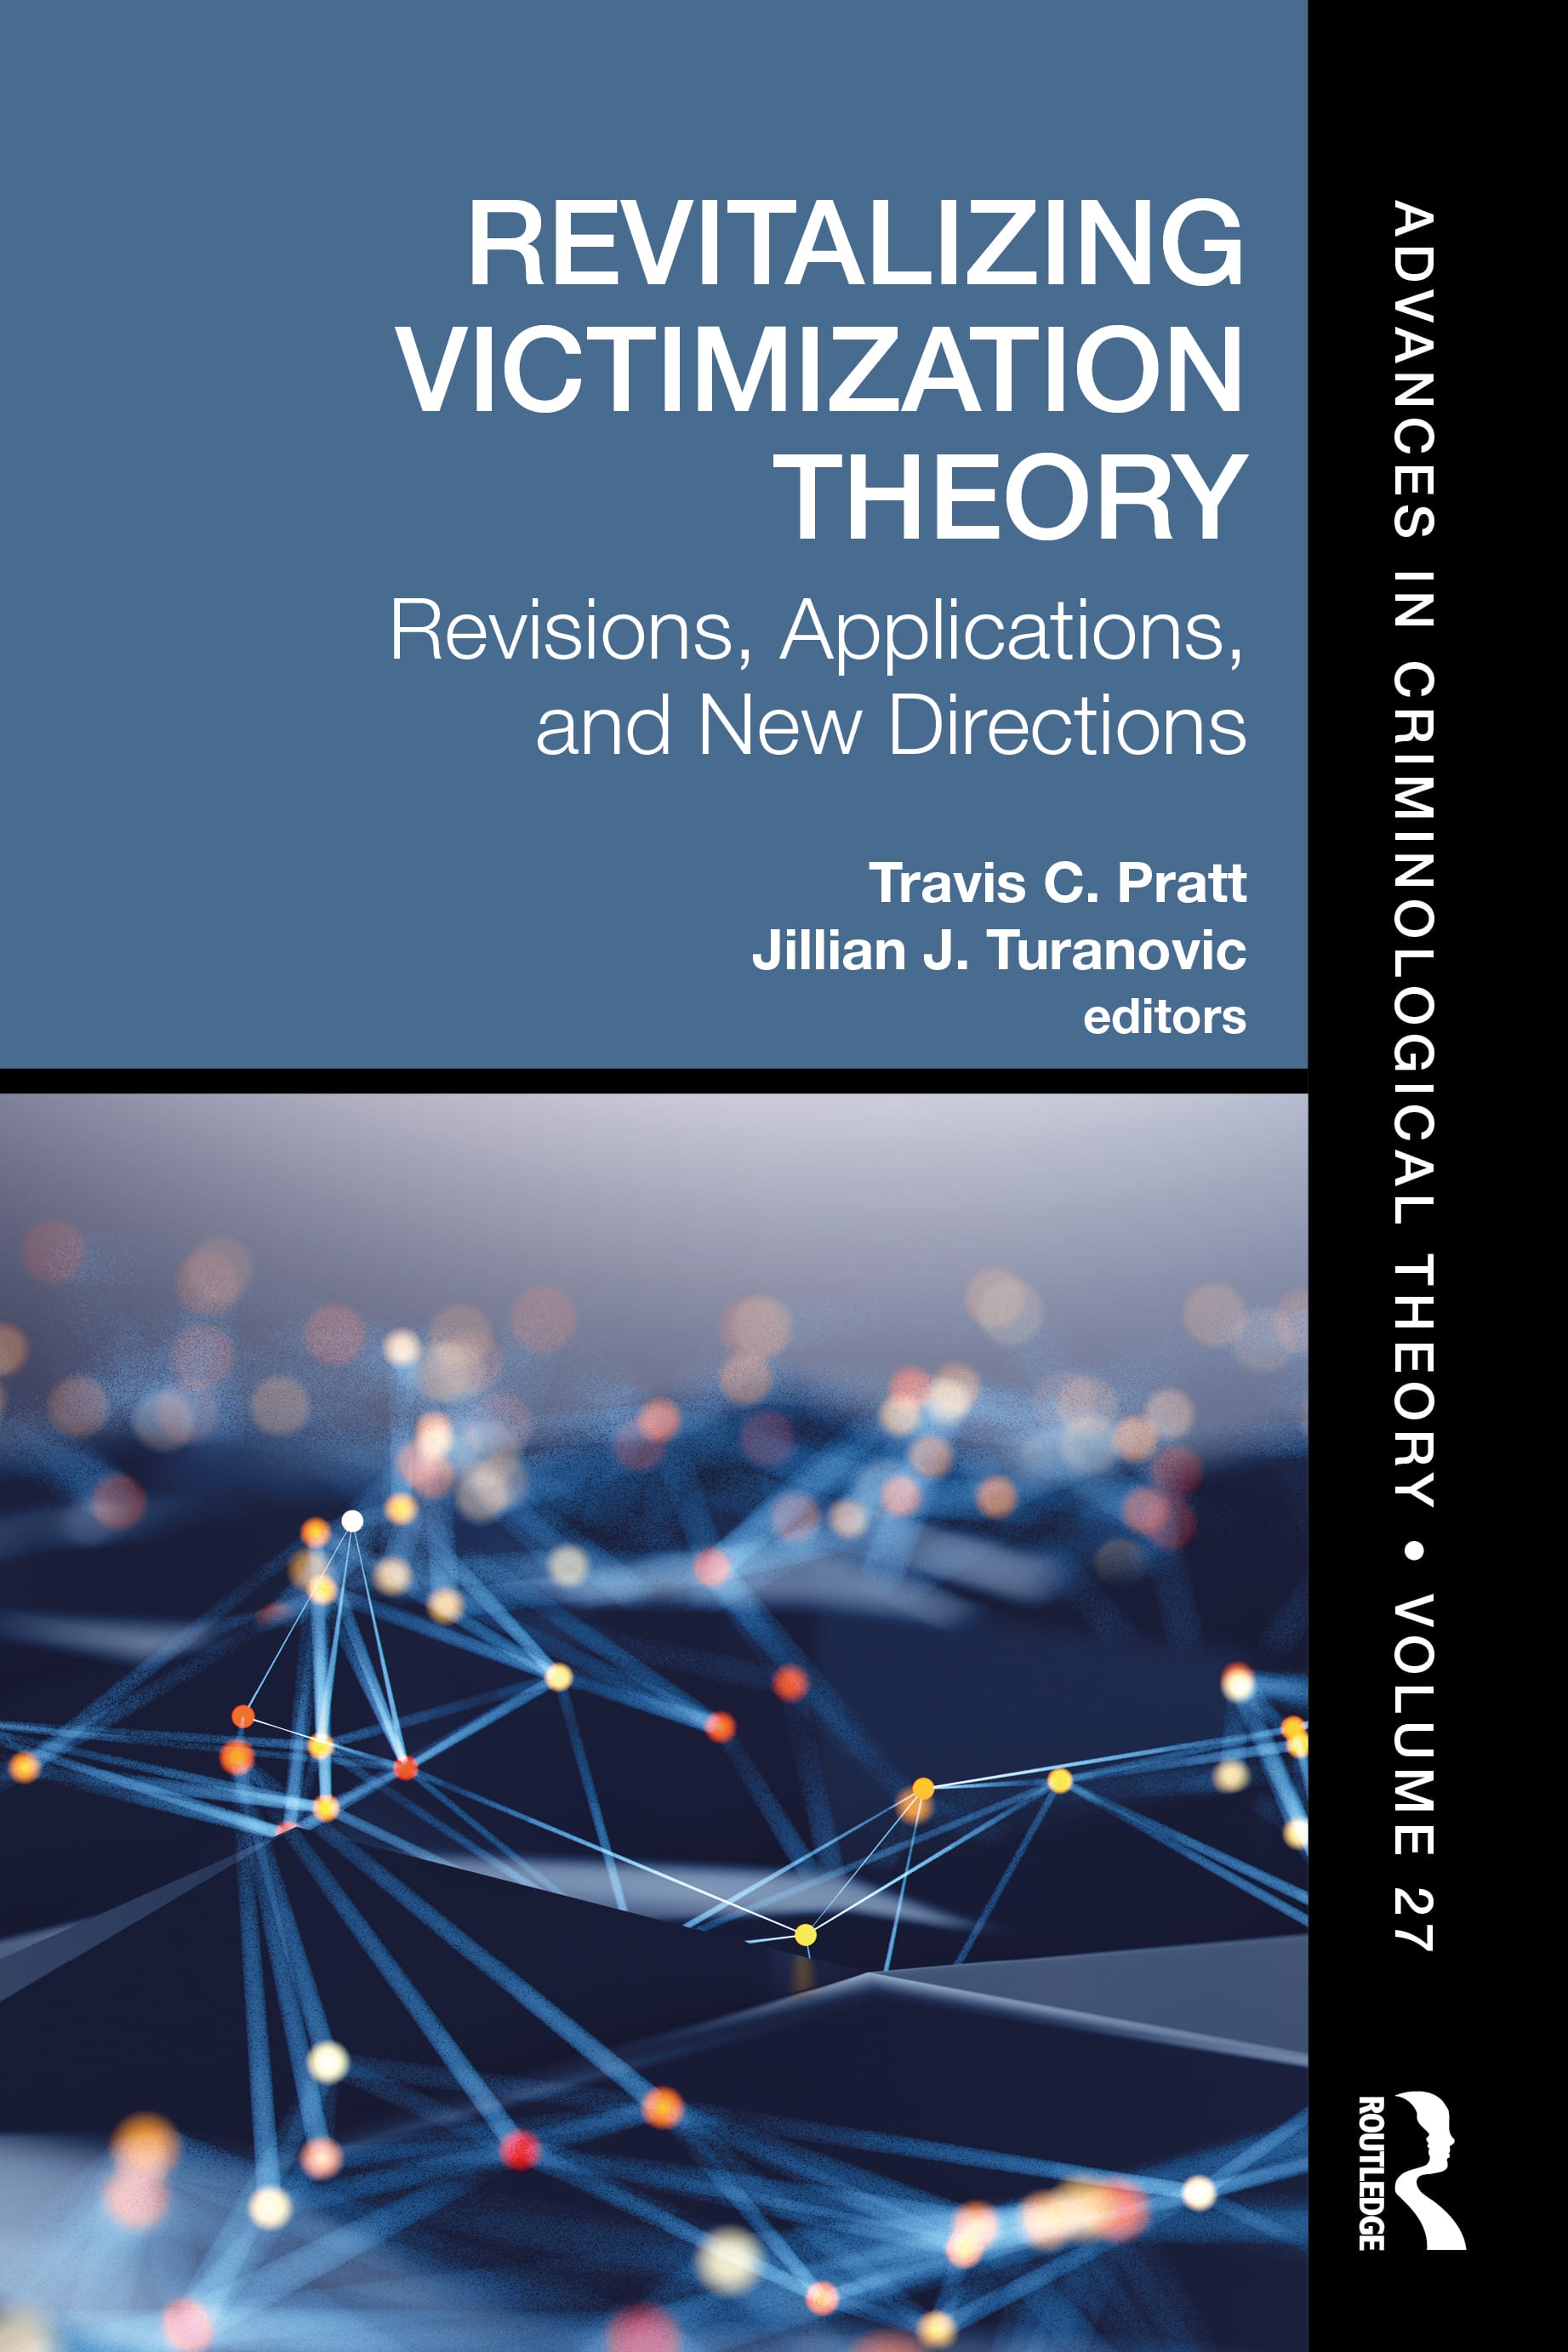 Revitalizing Victimization Theory: Revisions, Applications, and New Directions